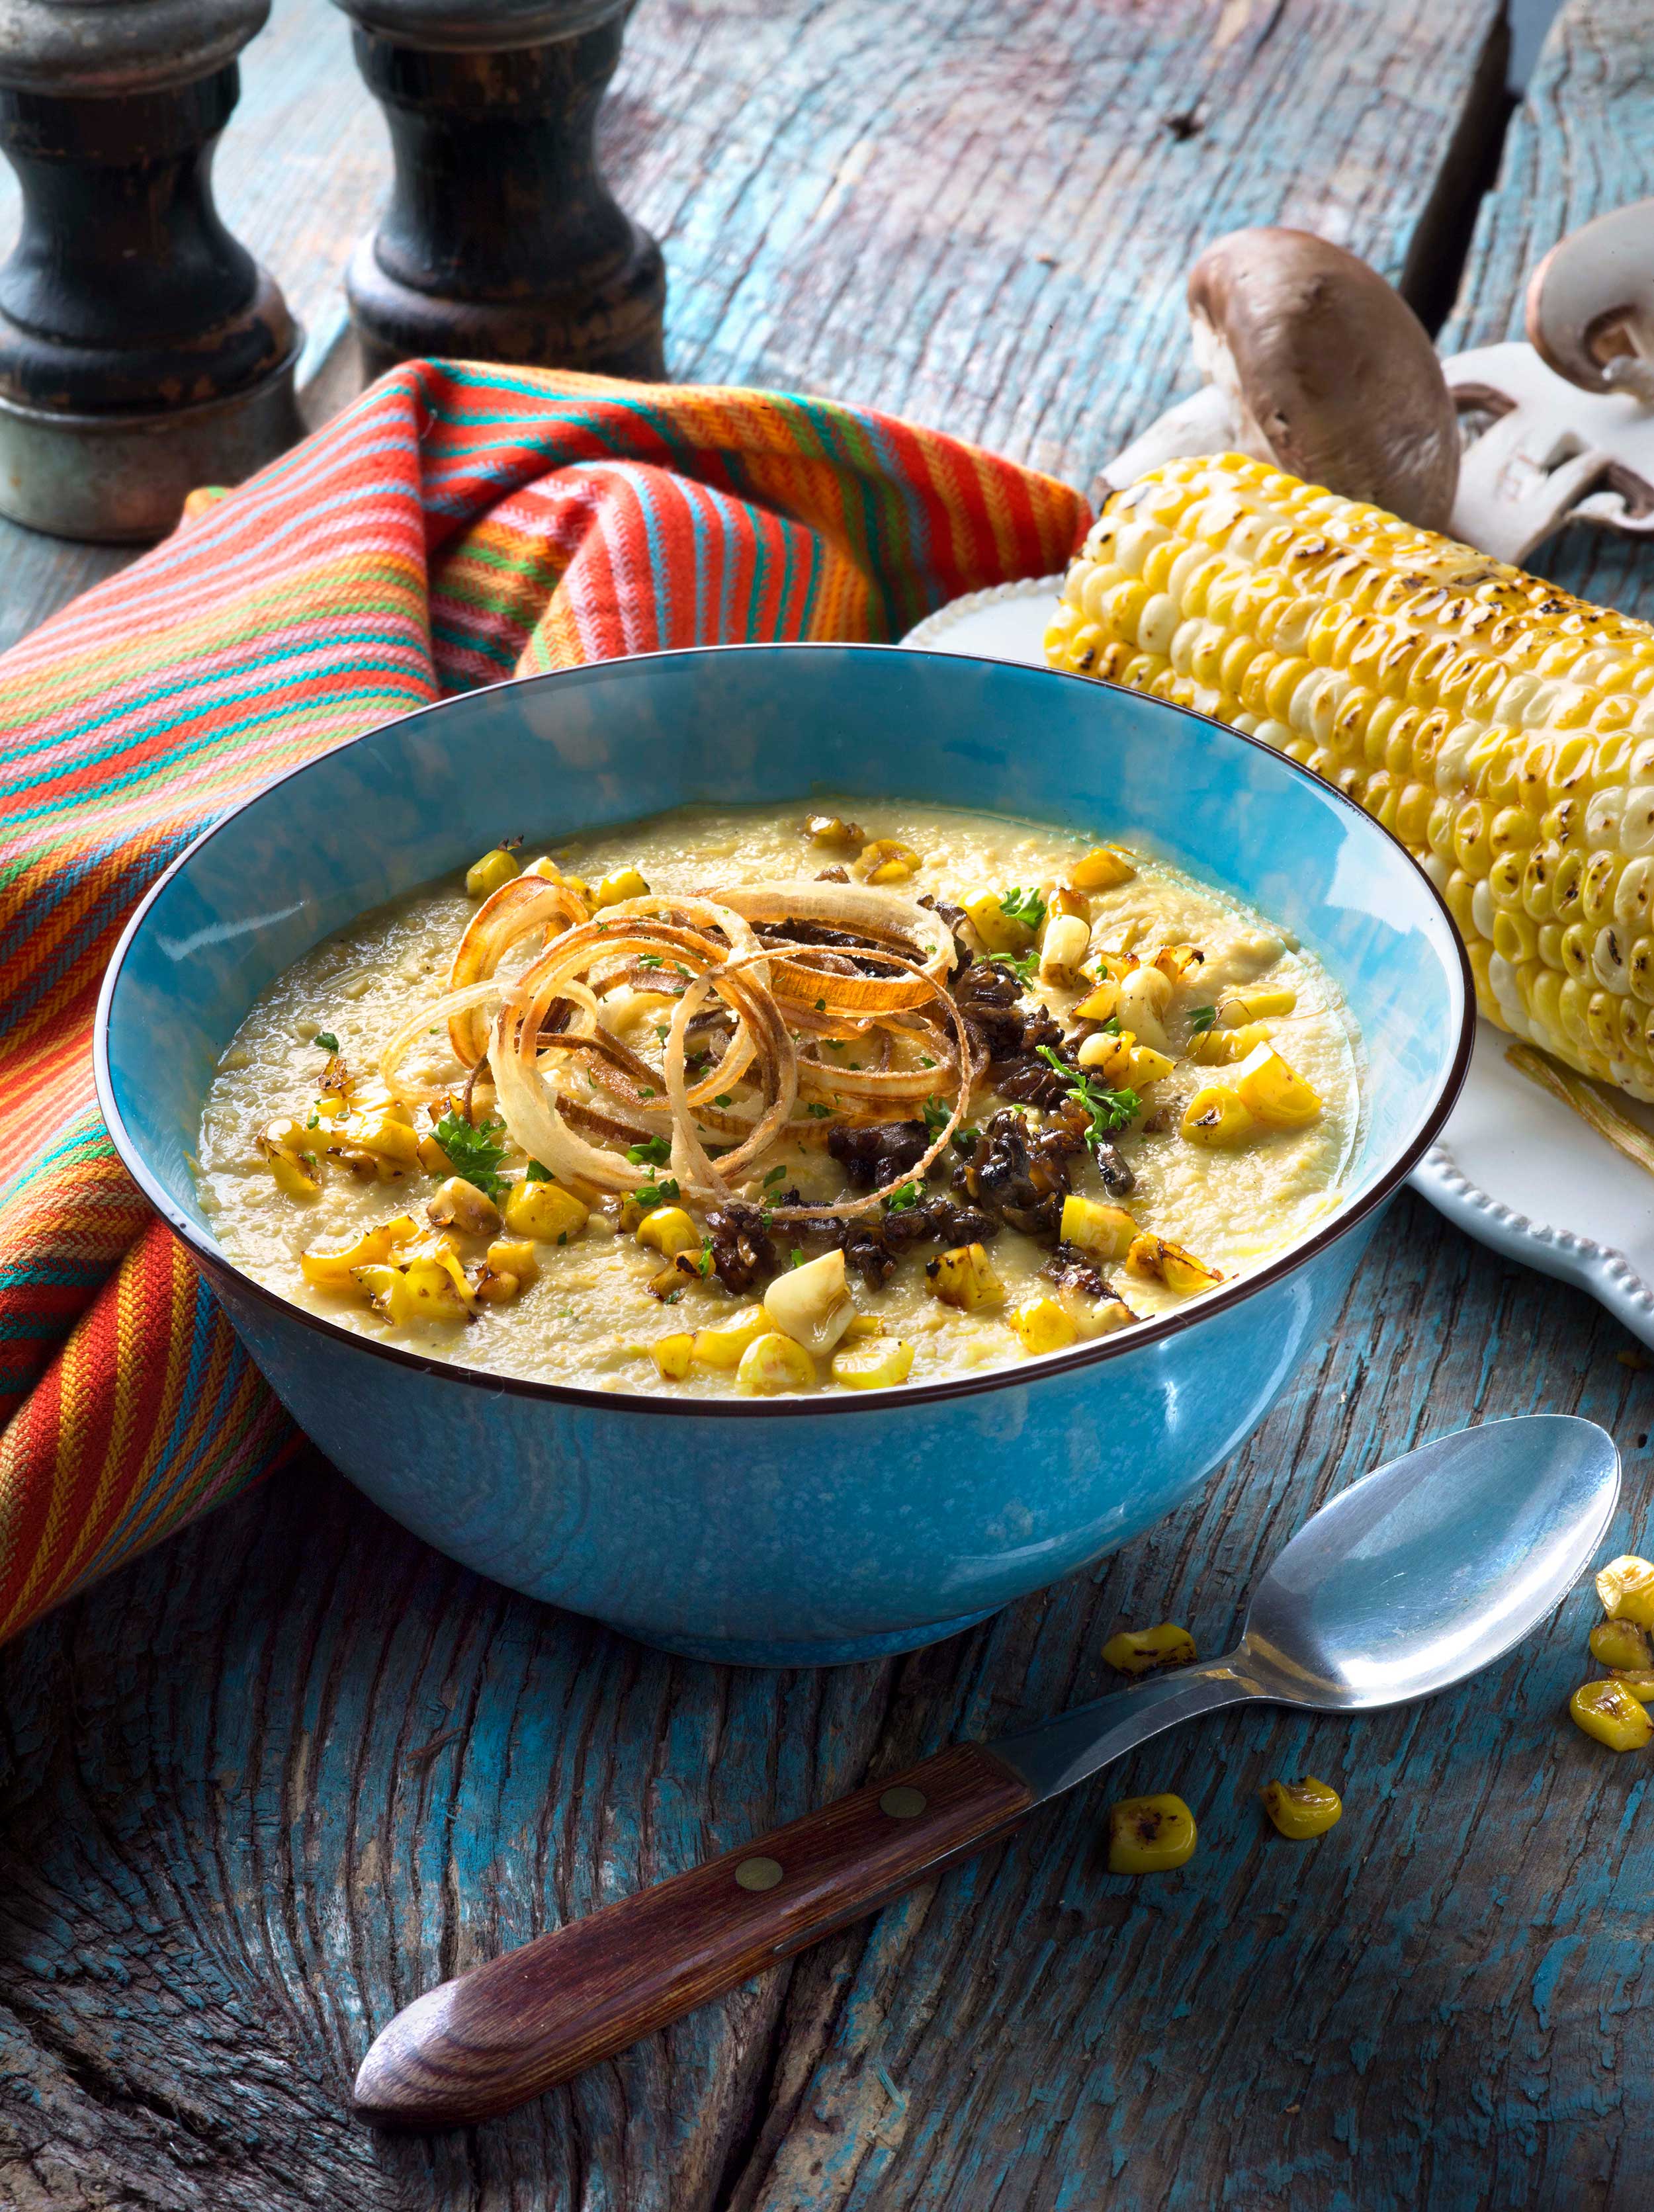 mike wepplo natural photography corn chowder soup with corn on cob